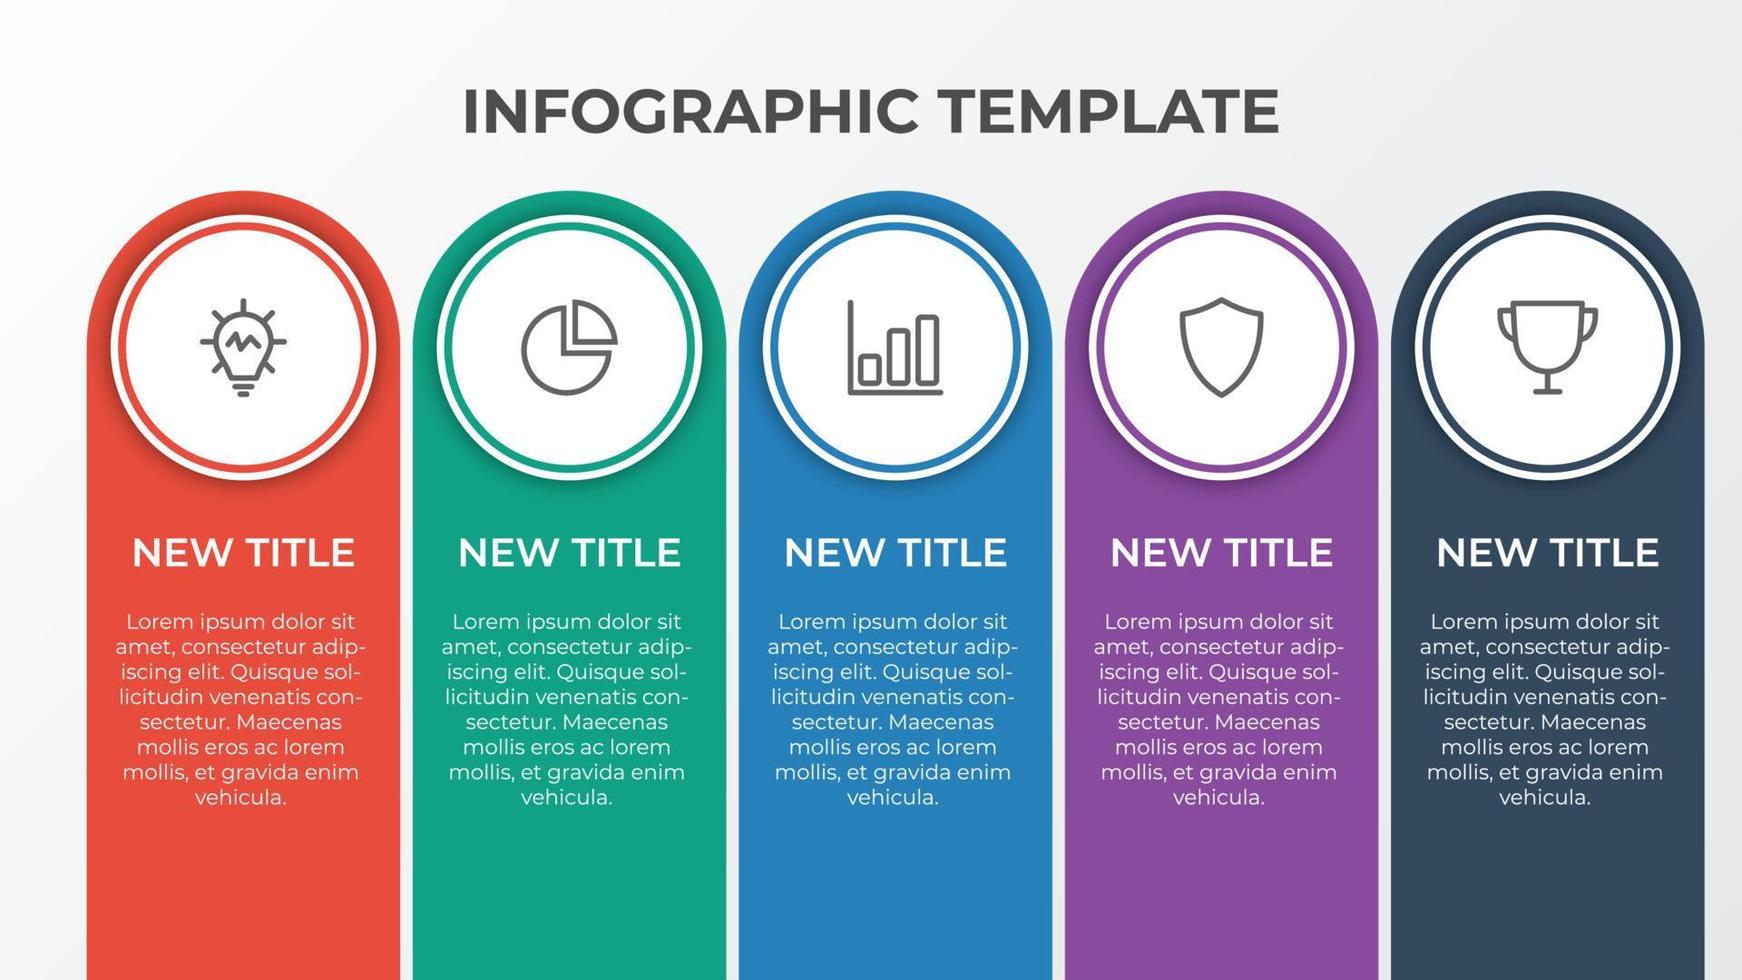 infographic list template element with 5 points and icons, use for describing or showing workflow, task, timeline, process, information on slide presentation, poster, brochure, banner, etc. vector